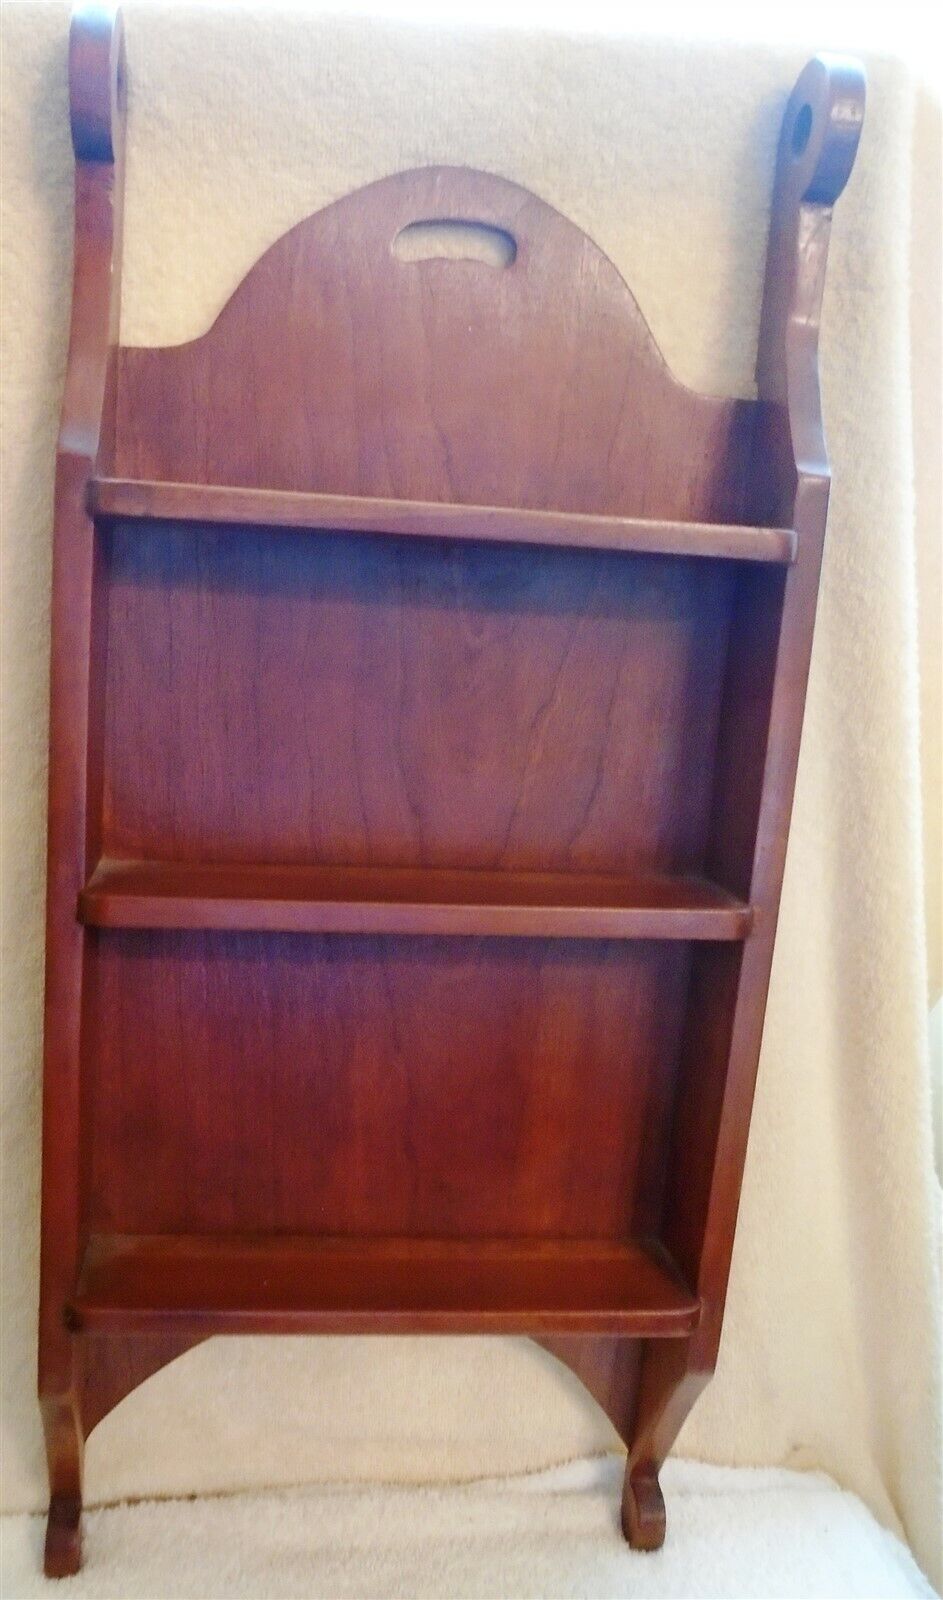 Vintage Wood Wall Hanging 3 Shelves 24 by 11 Inches by 2 1/2 Inches